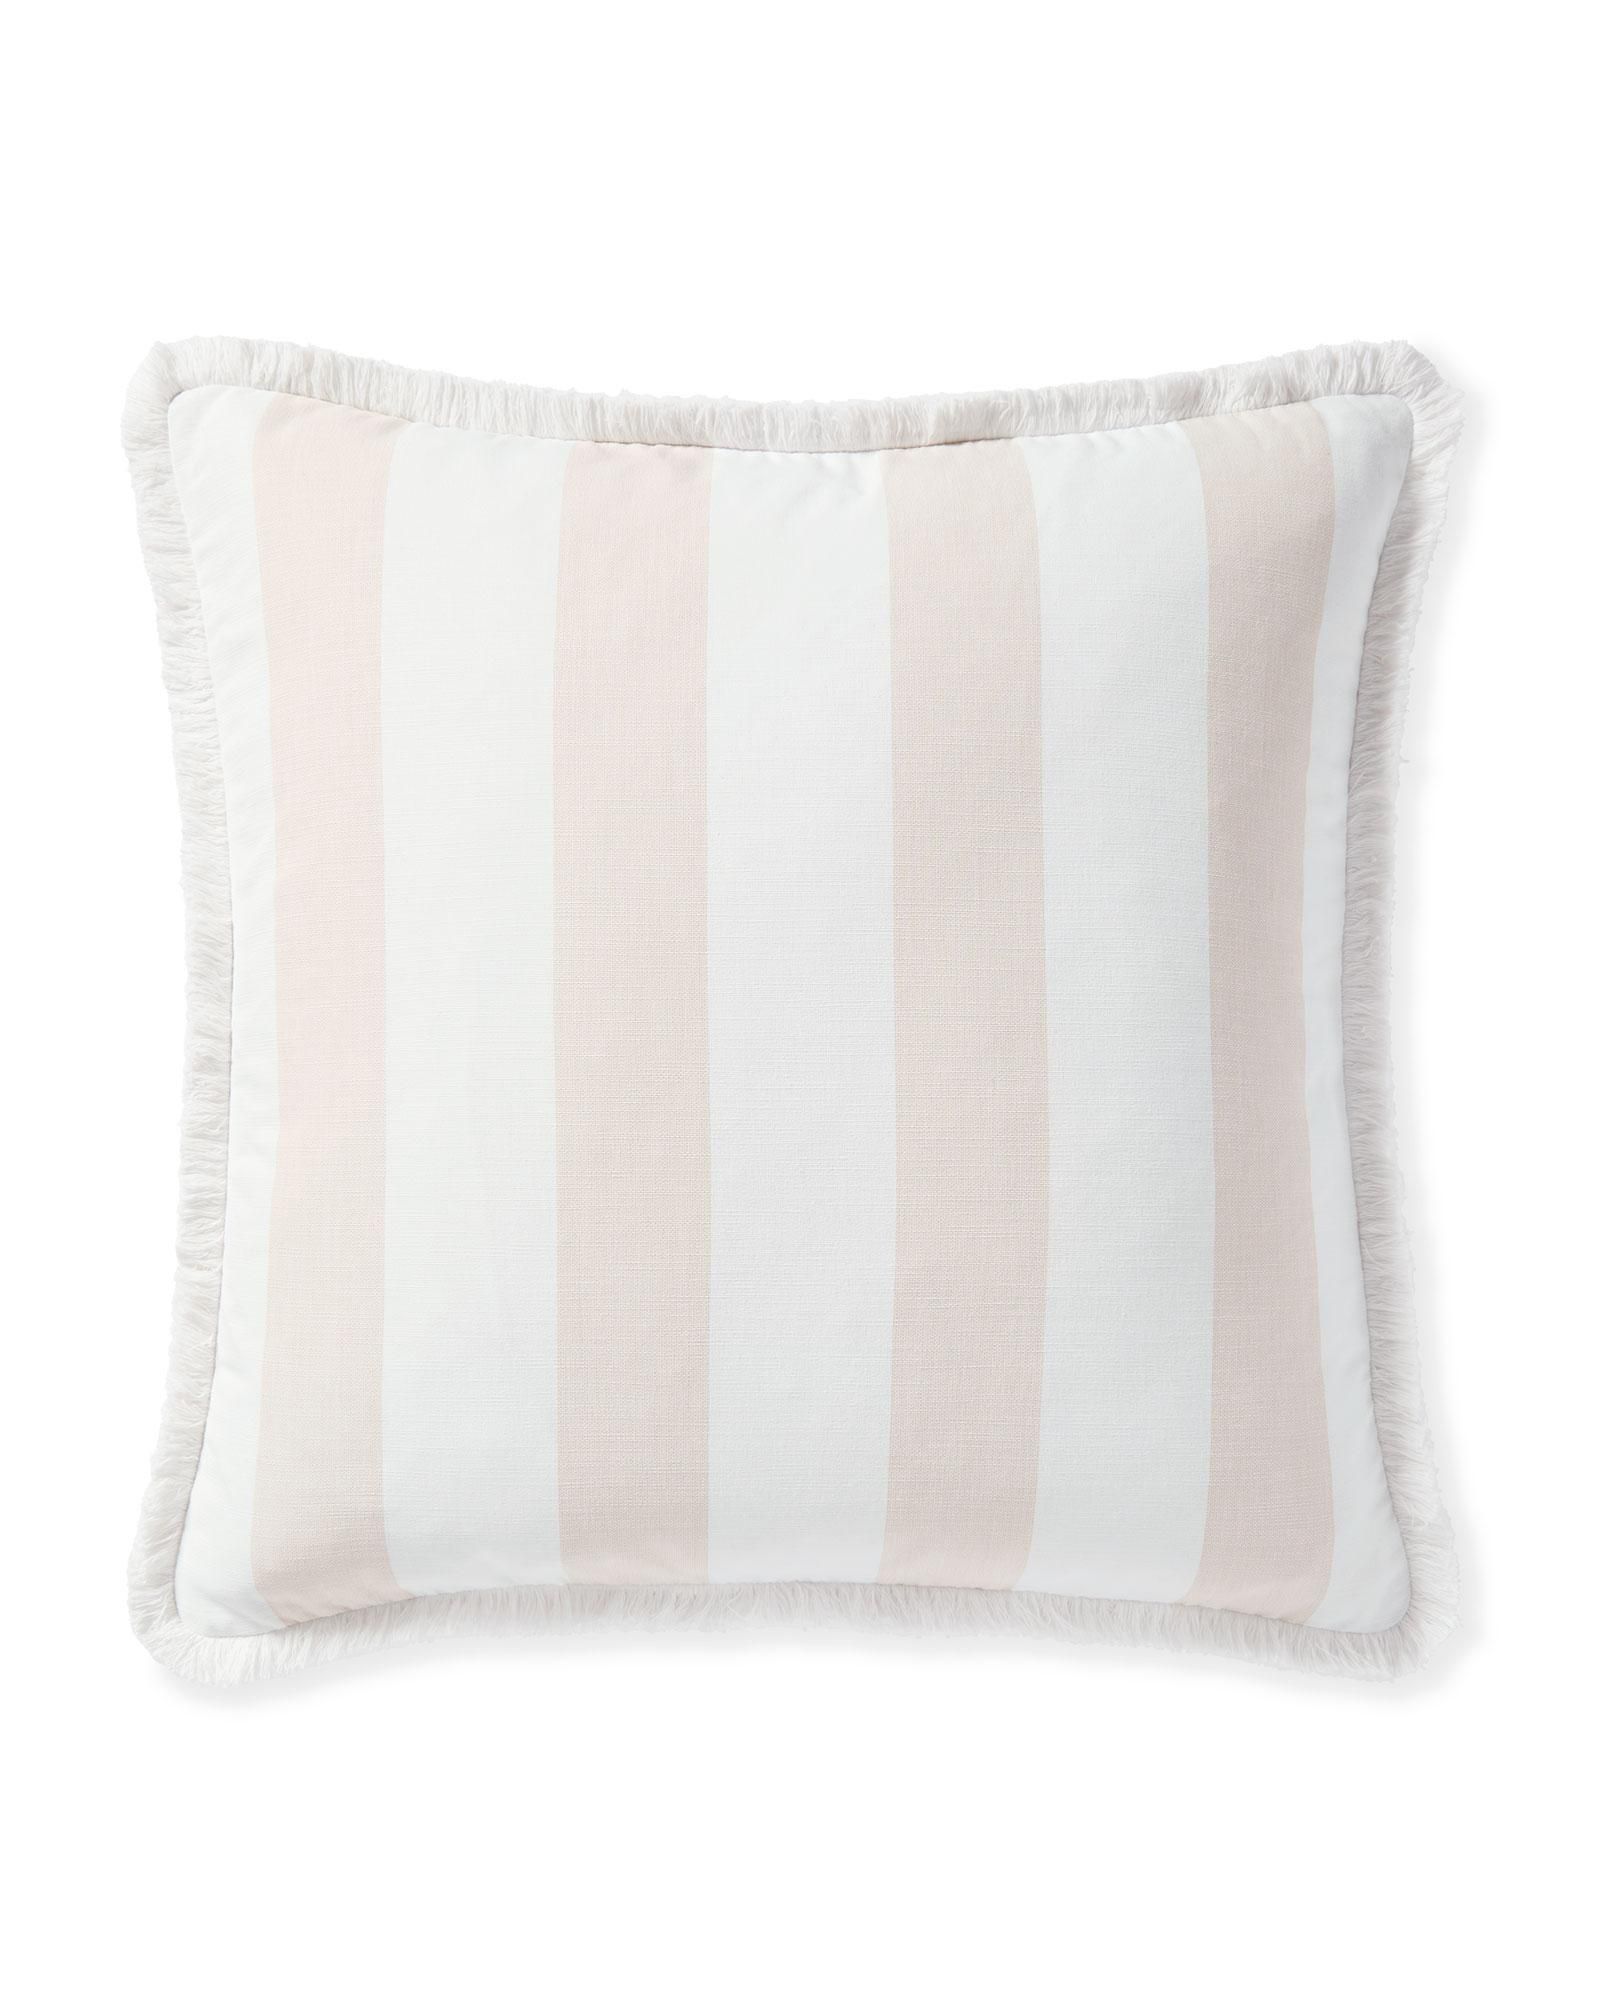 Perennials Harbor Stripe Pillow Cover | Serena and Lily